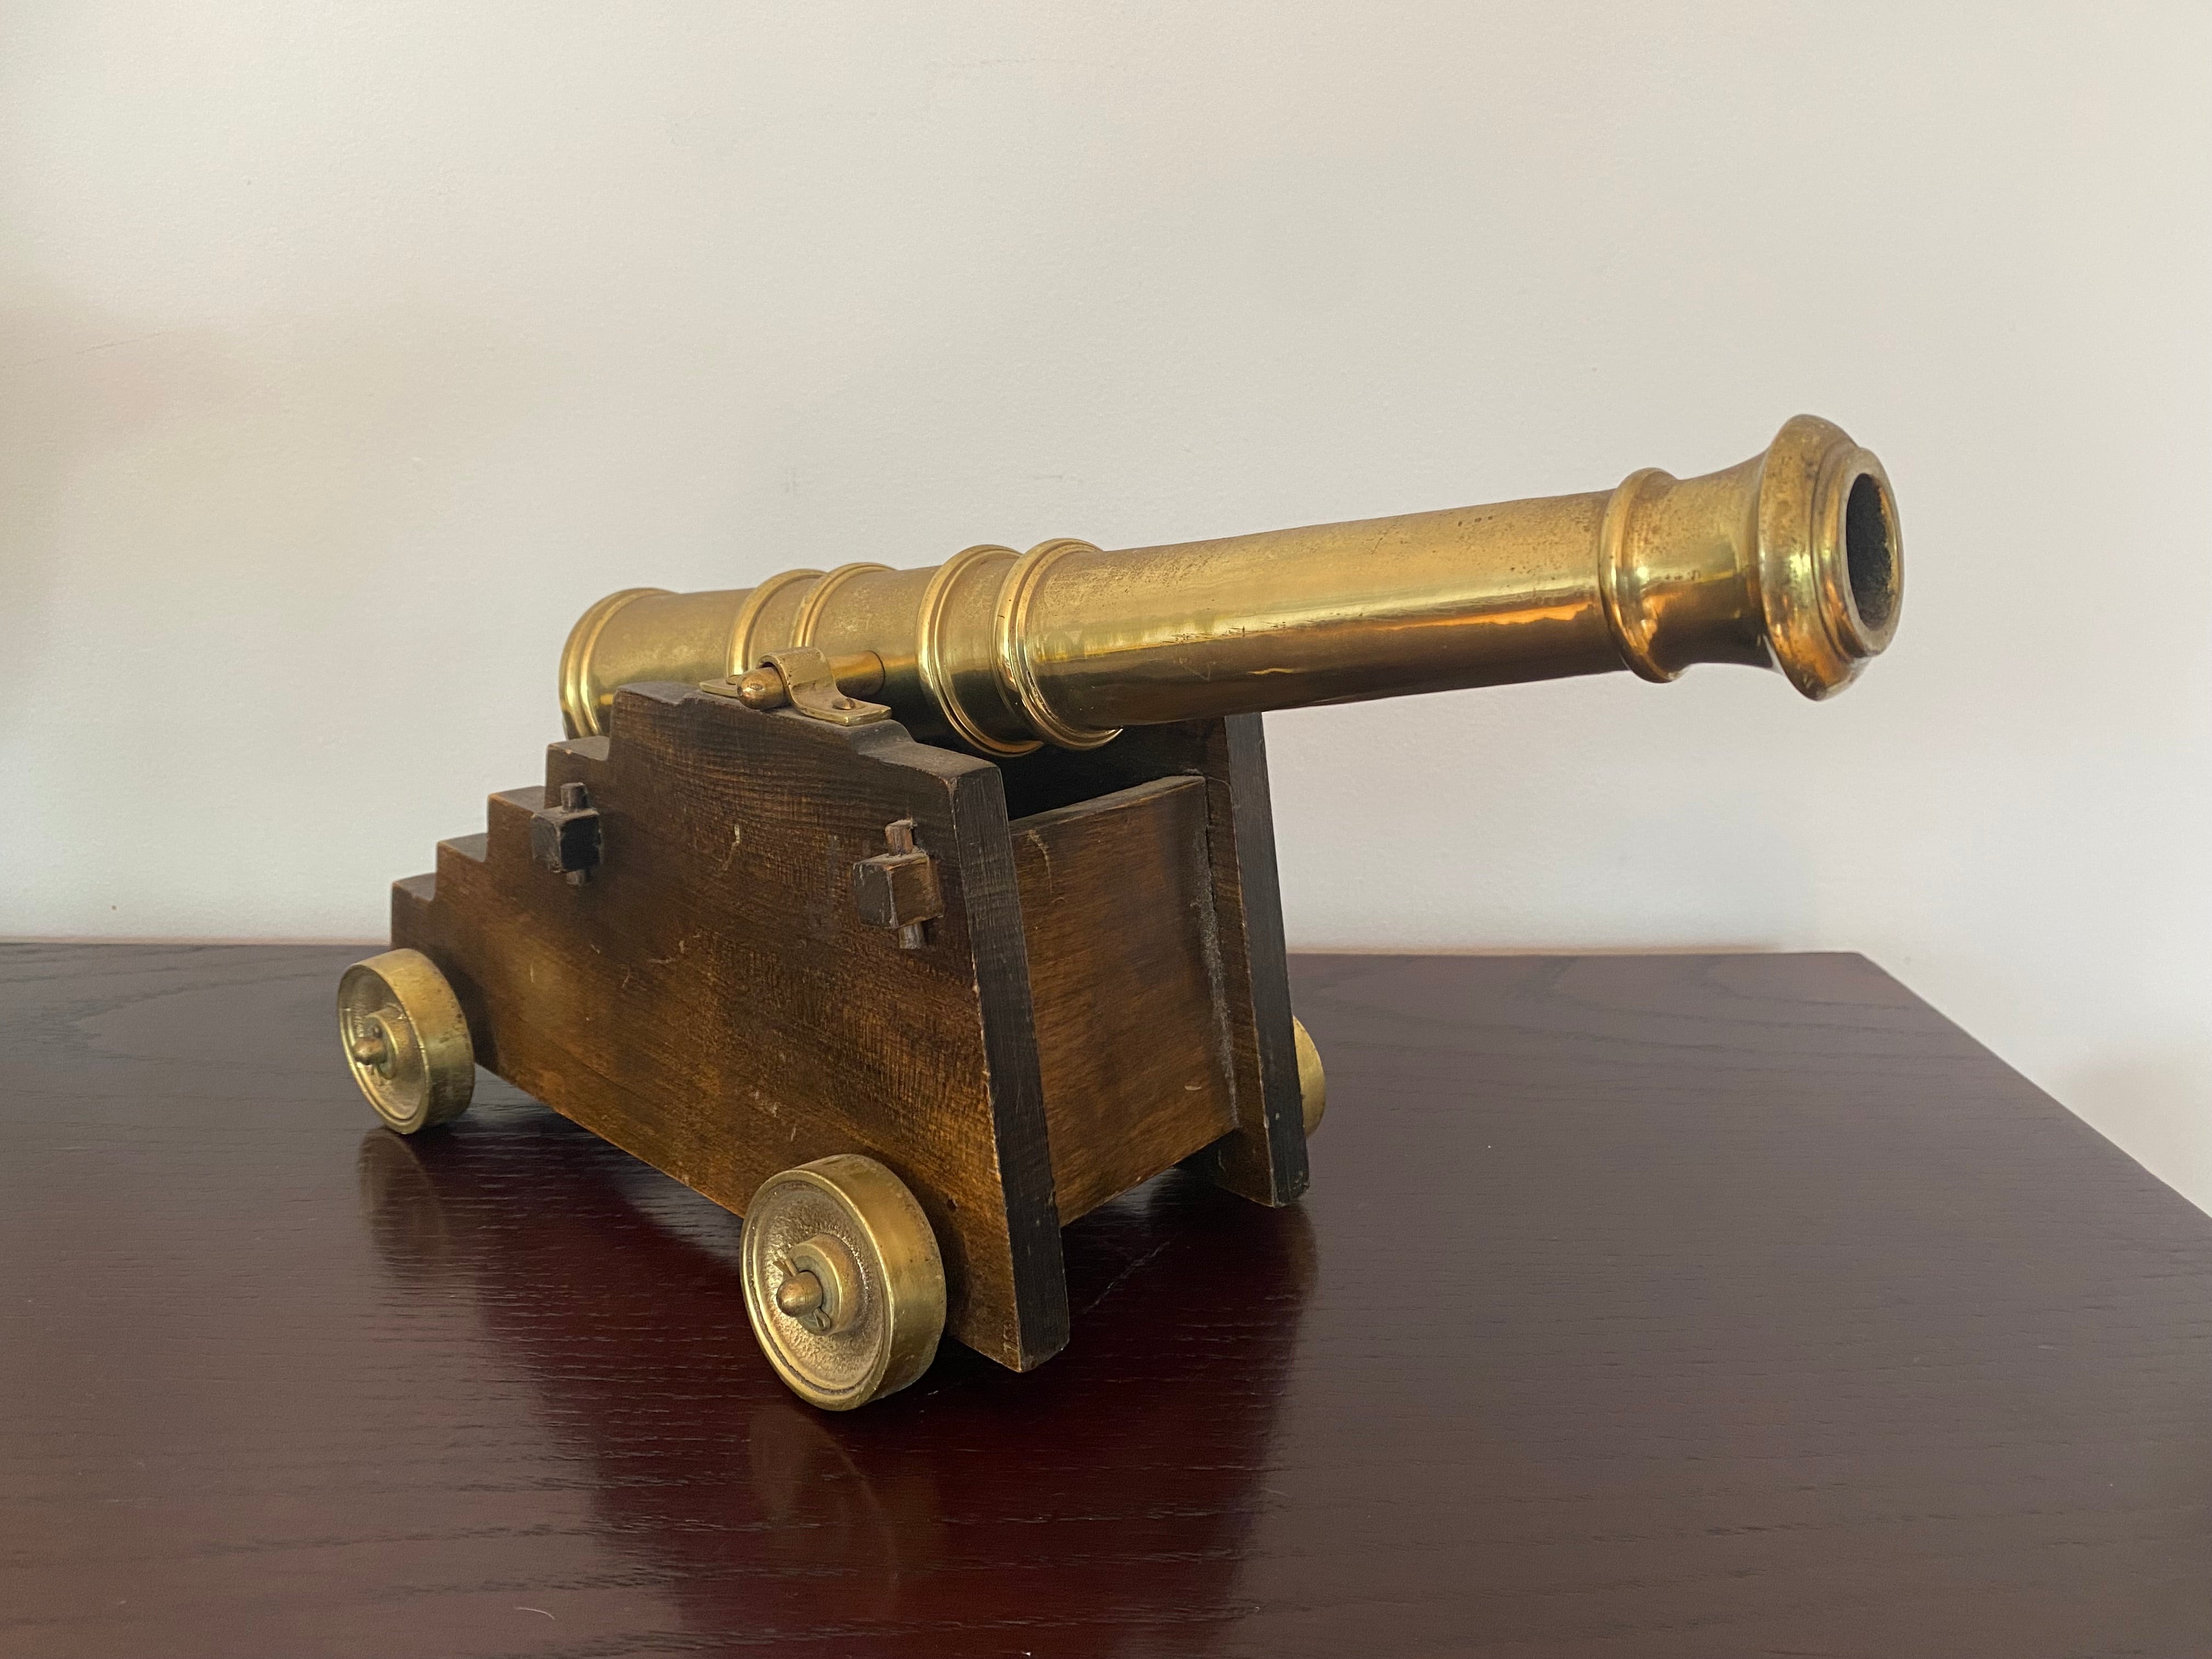 Vintage, mid 20th century, brass signal Cannon with wood base.